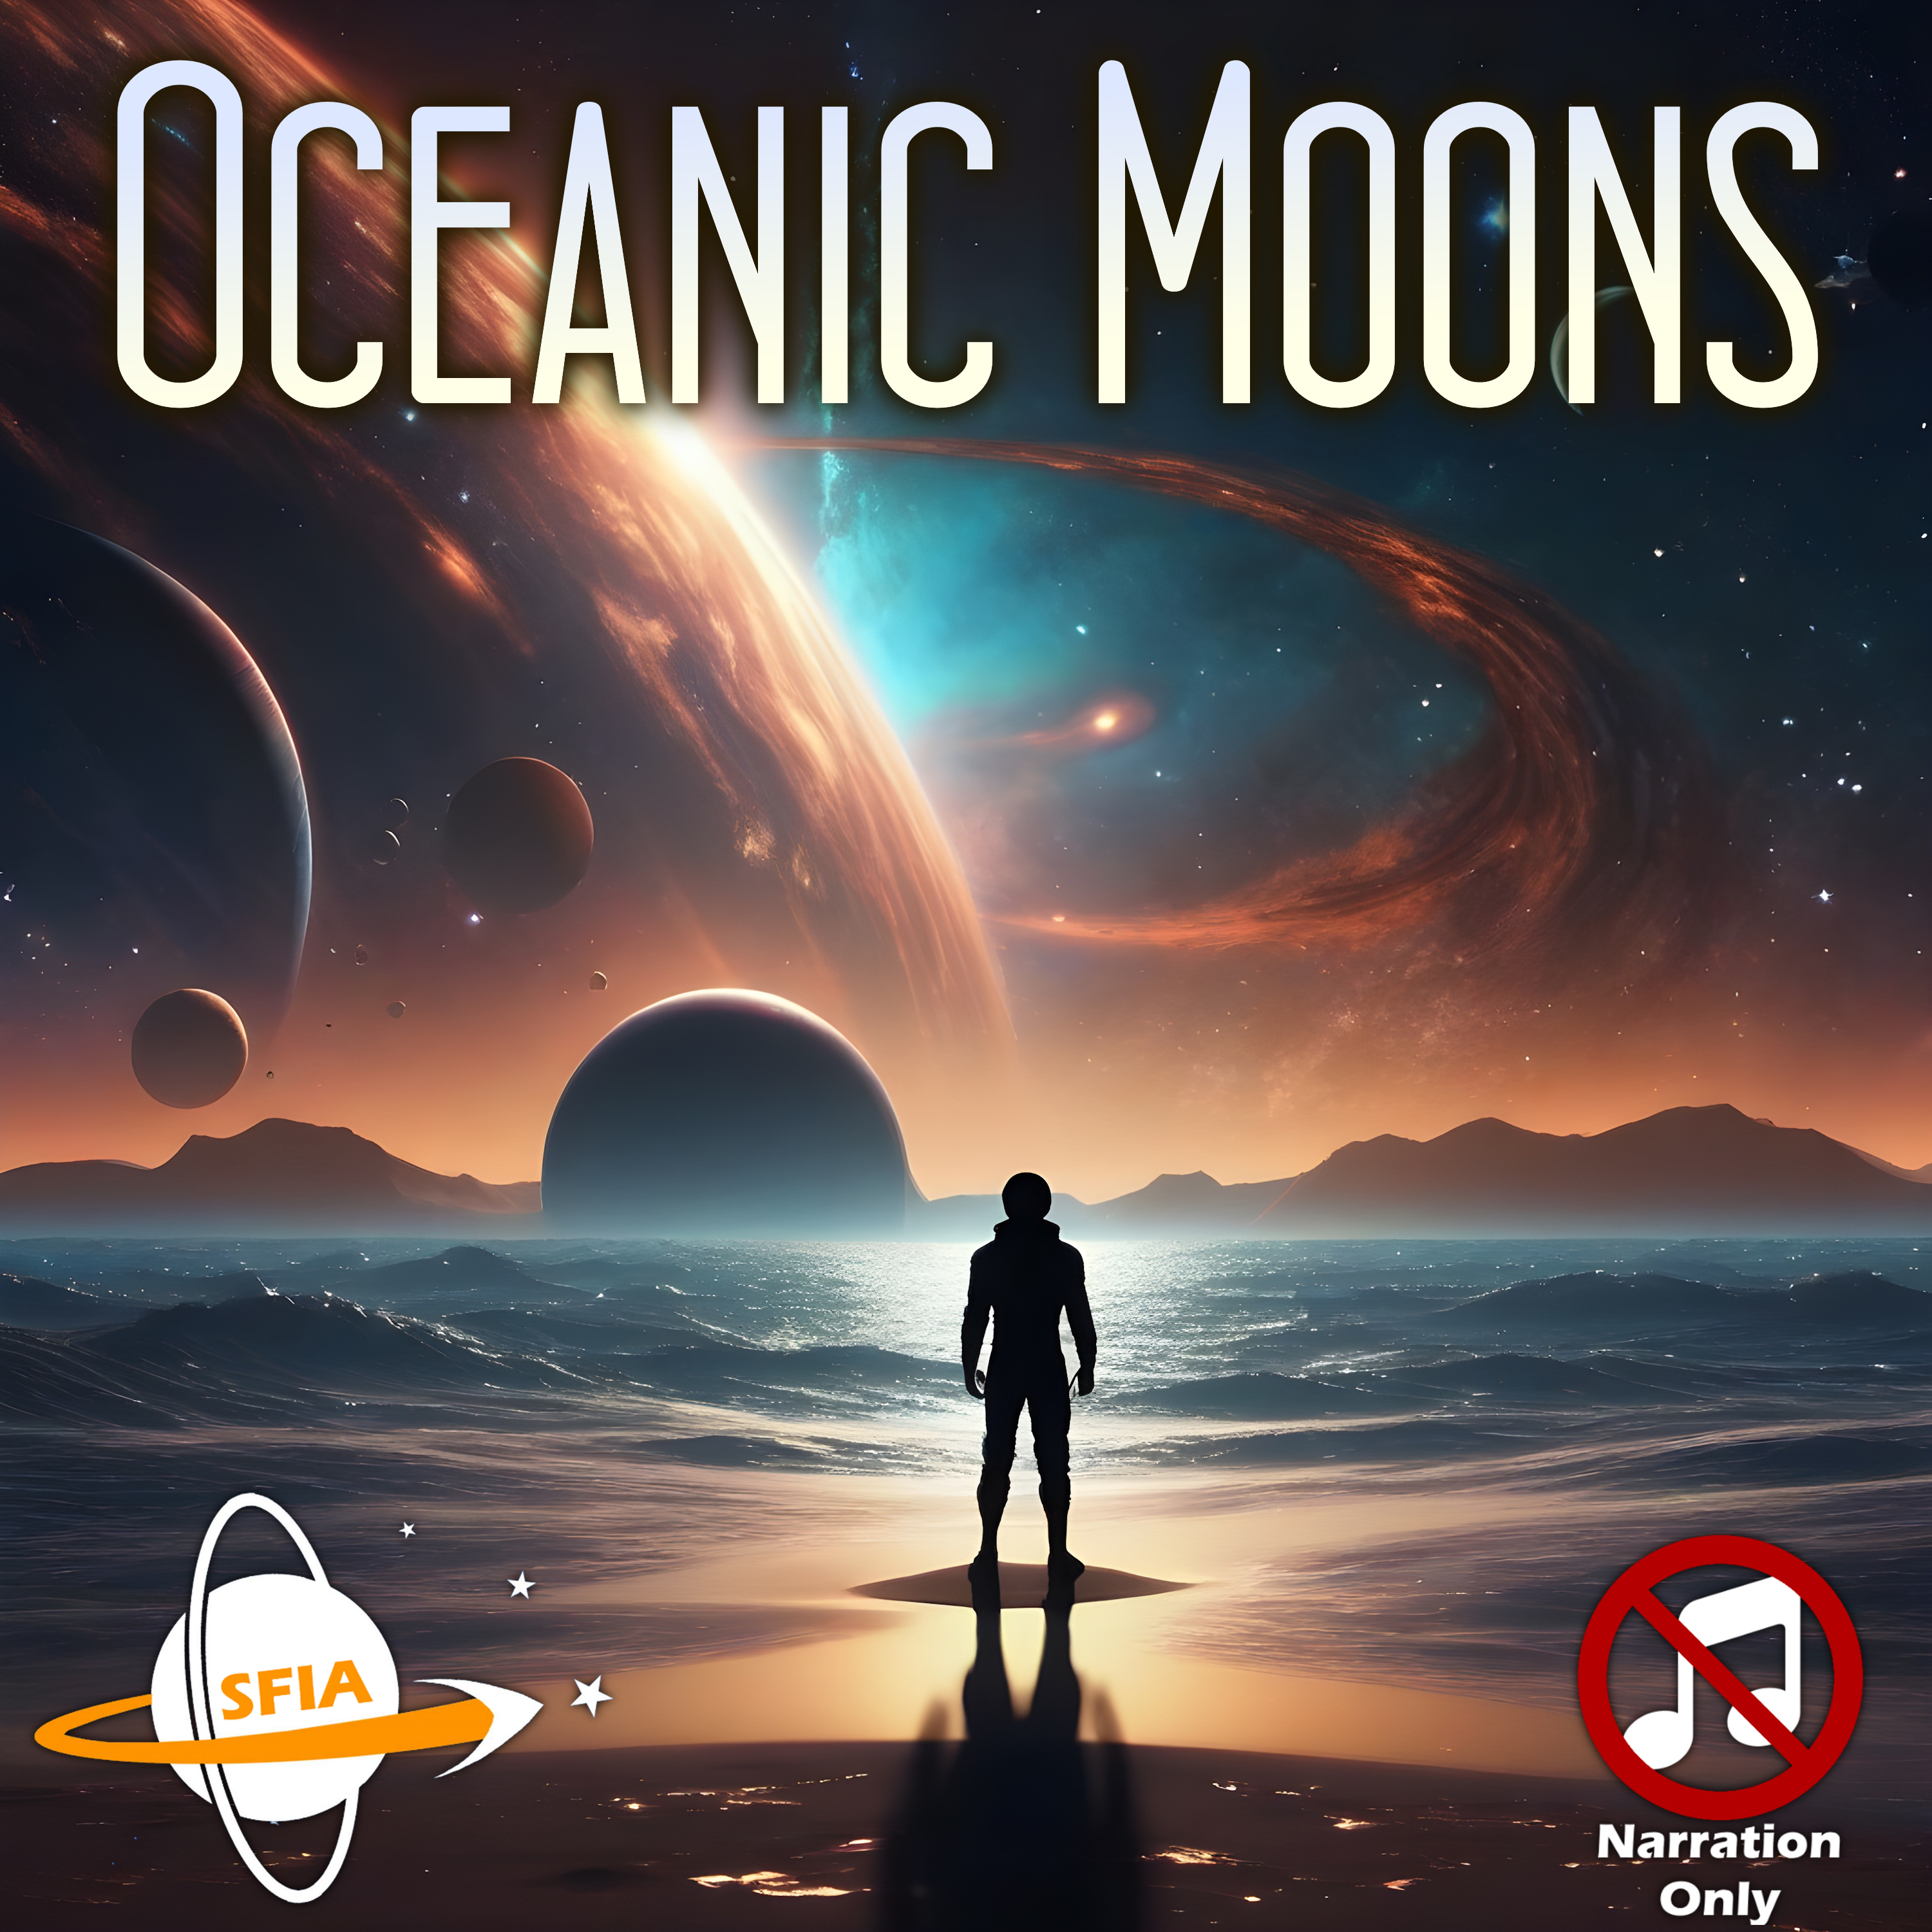 Oceanic Moons (Narration Only)